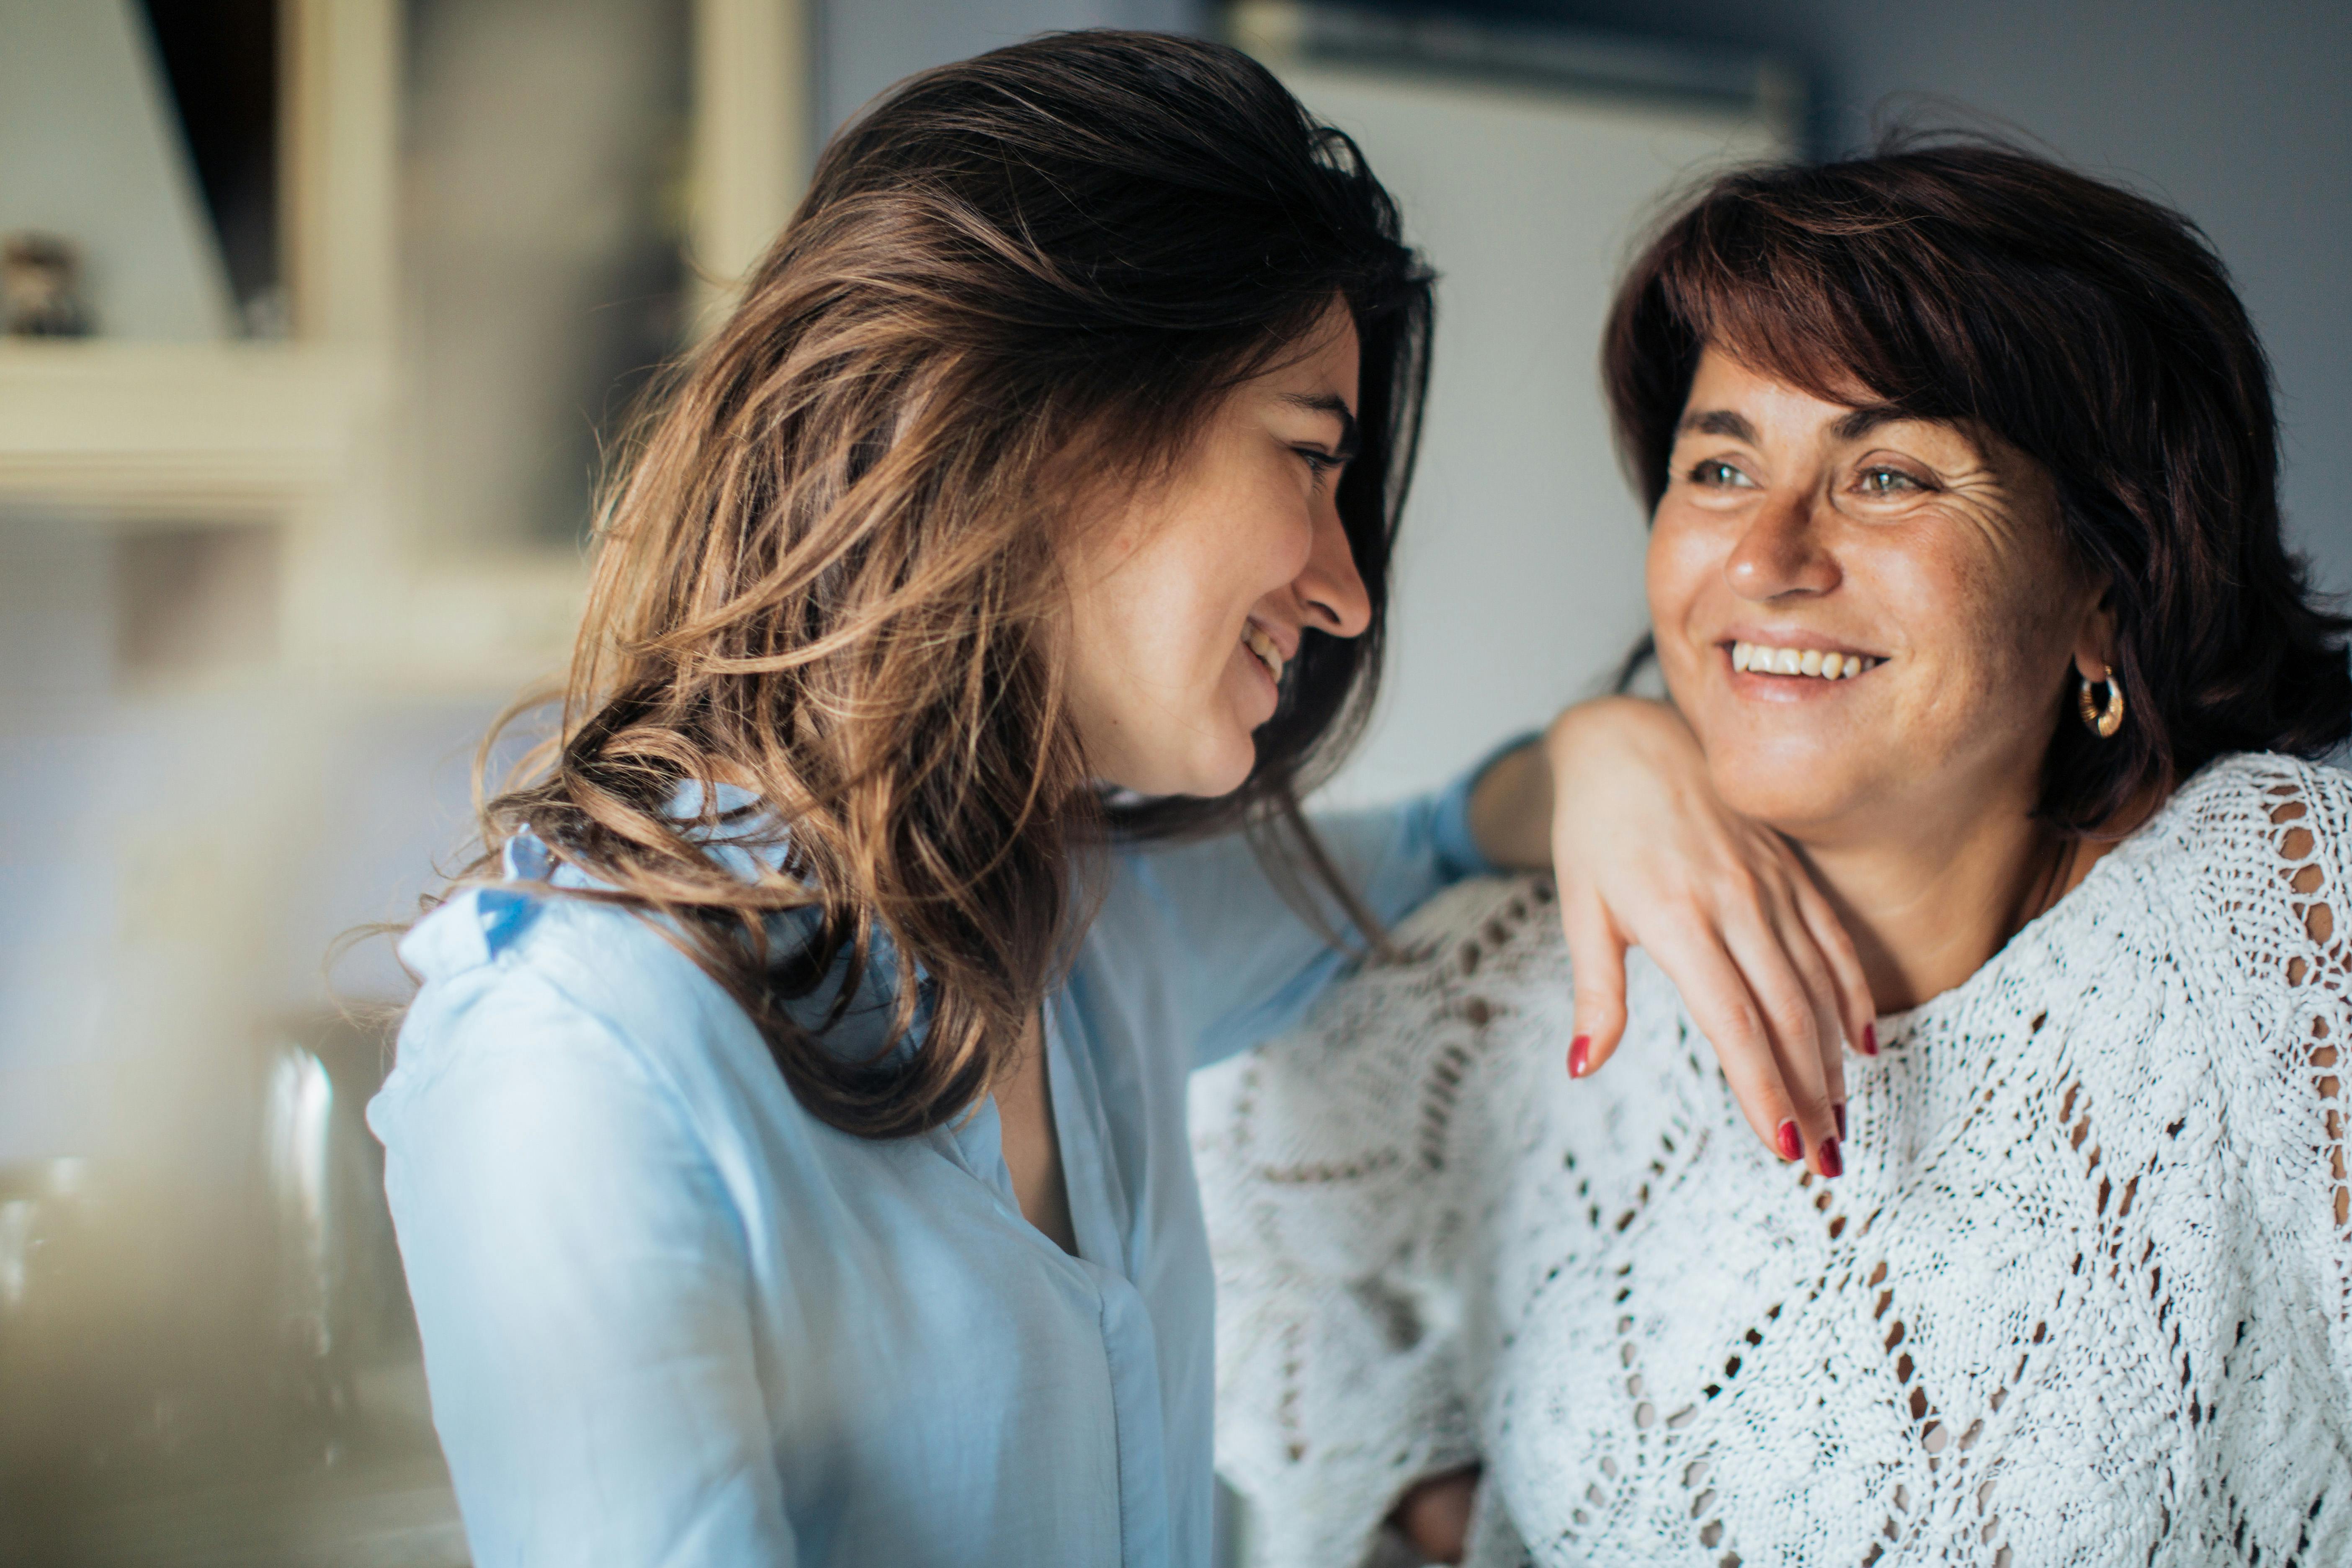 Mother and daughter smiling at each other | Source: Pexels